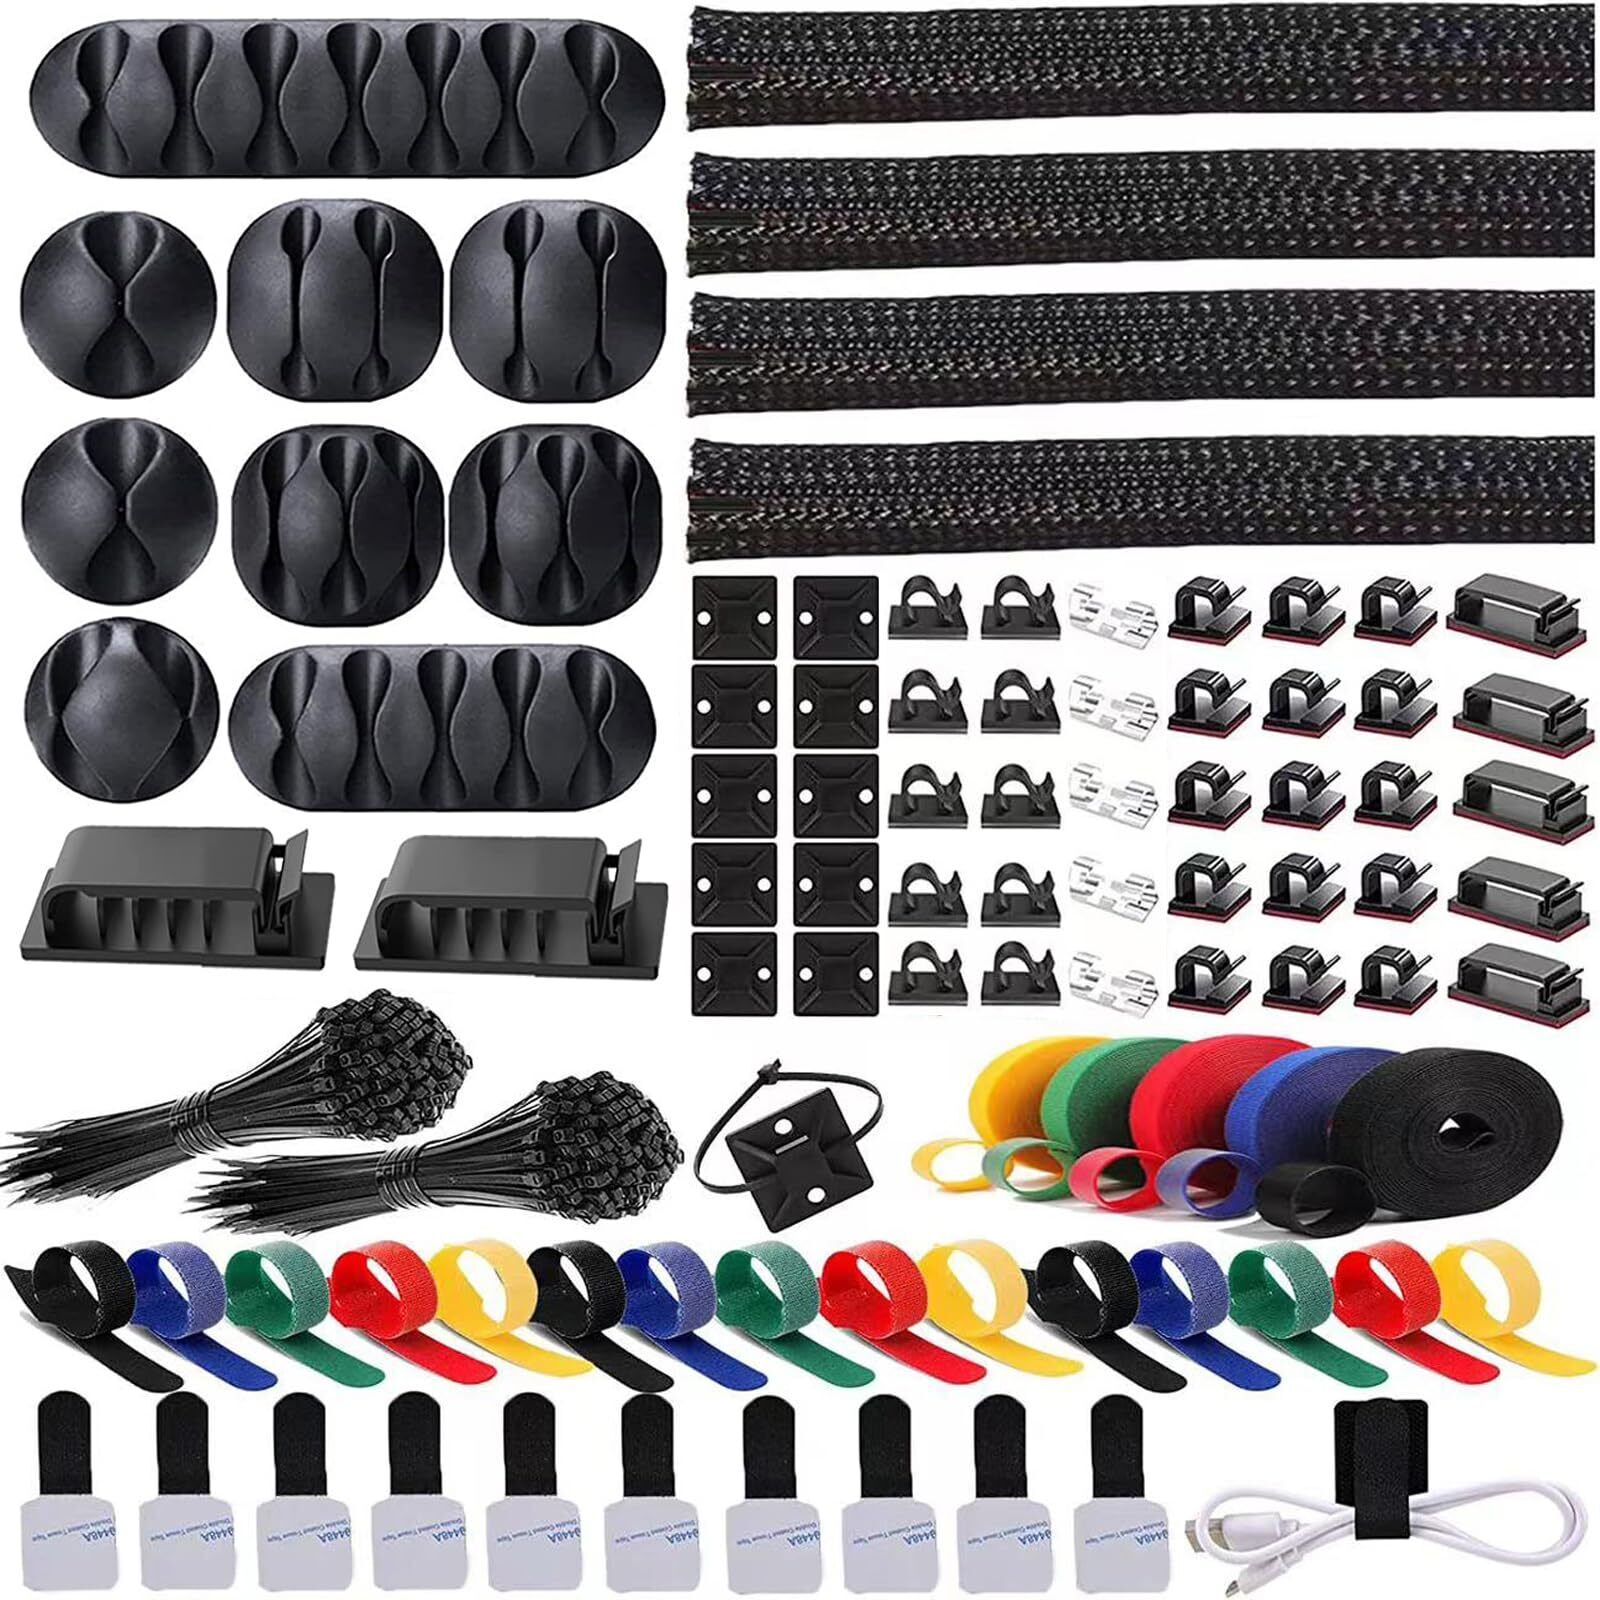 300PCS Cable Management Kit,4 Cable Sleeve 35 Cable Clips with 11Cord Holders...